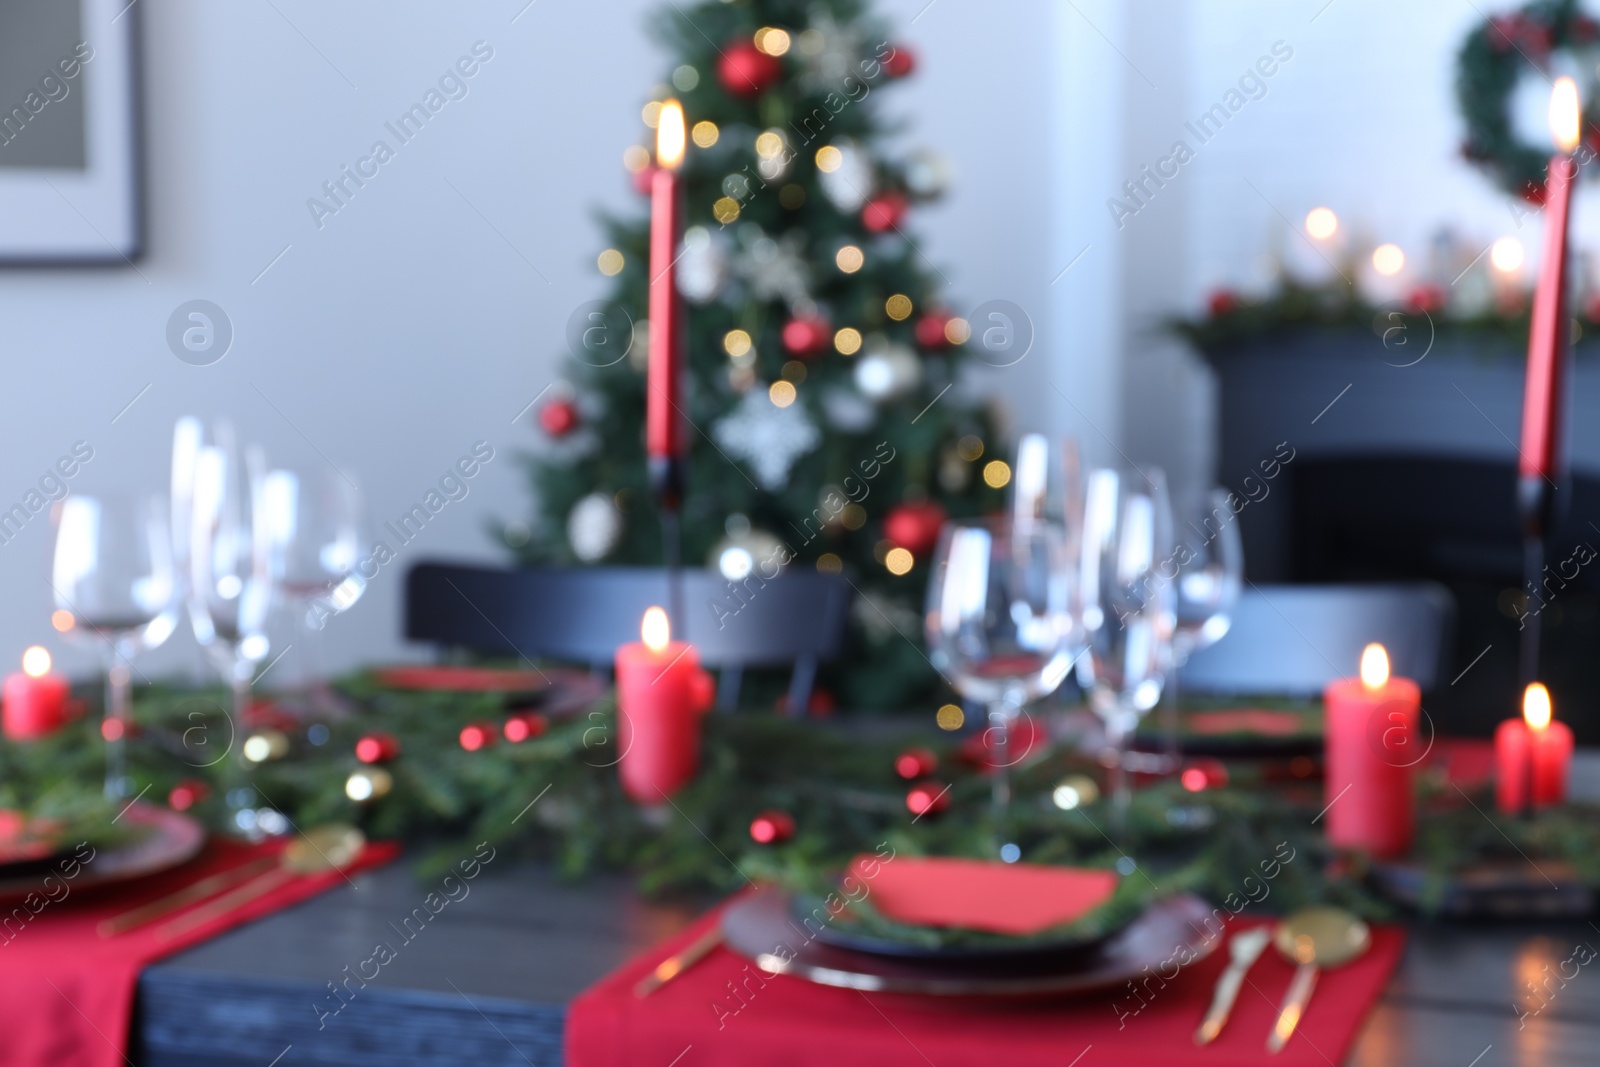 Photo of Elegant Christmas table setting with dishware and burning candles in festively decorated room, blurred view